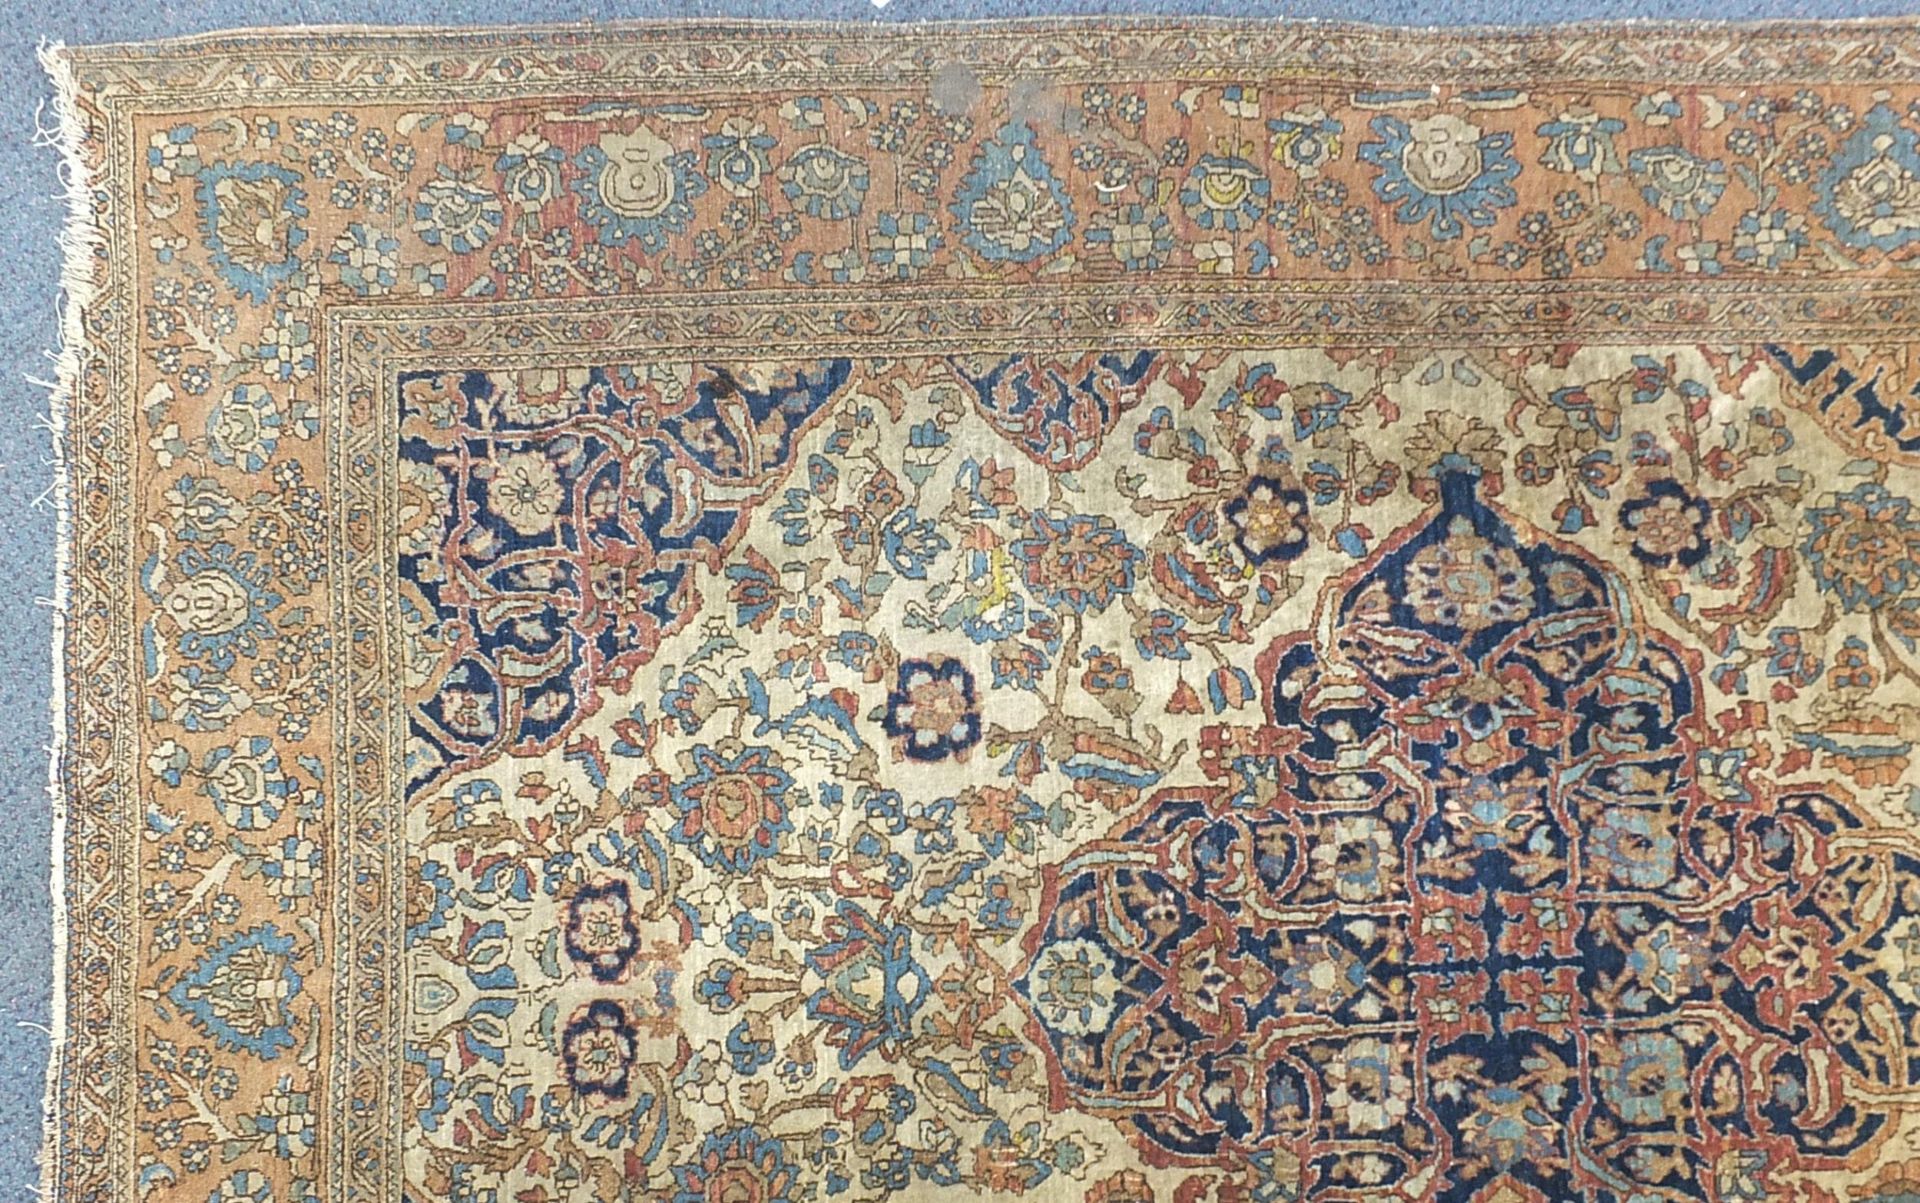 Rectangular beige and blue ground rug having an all over floral design, 205cm x 143cm - Image 2 of 6